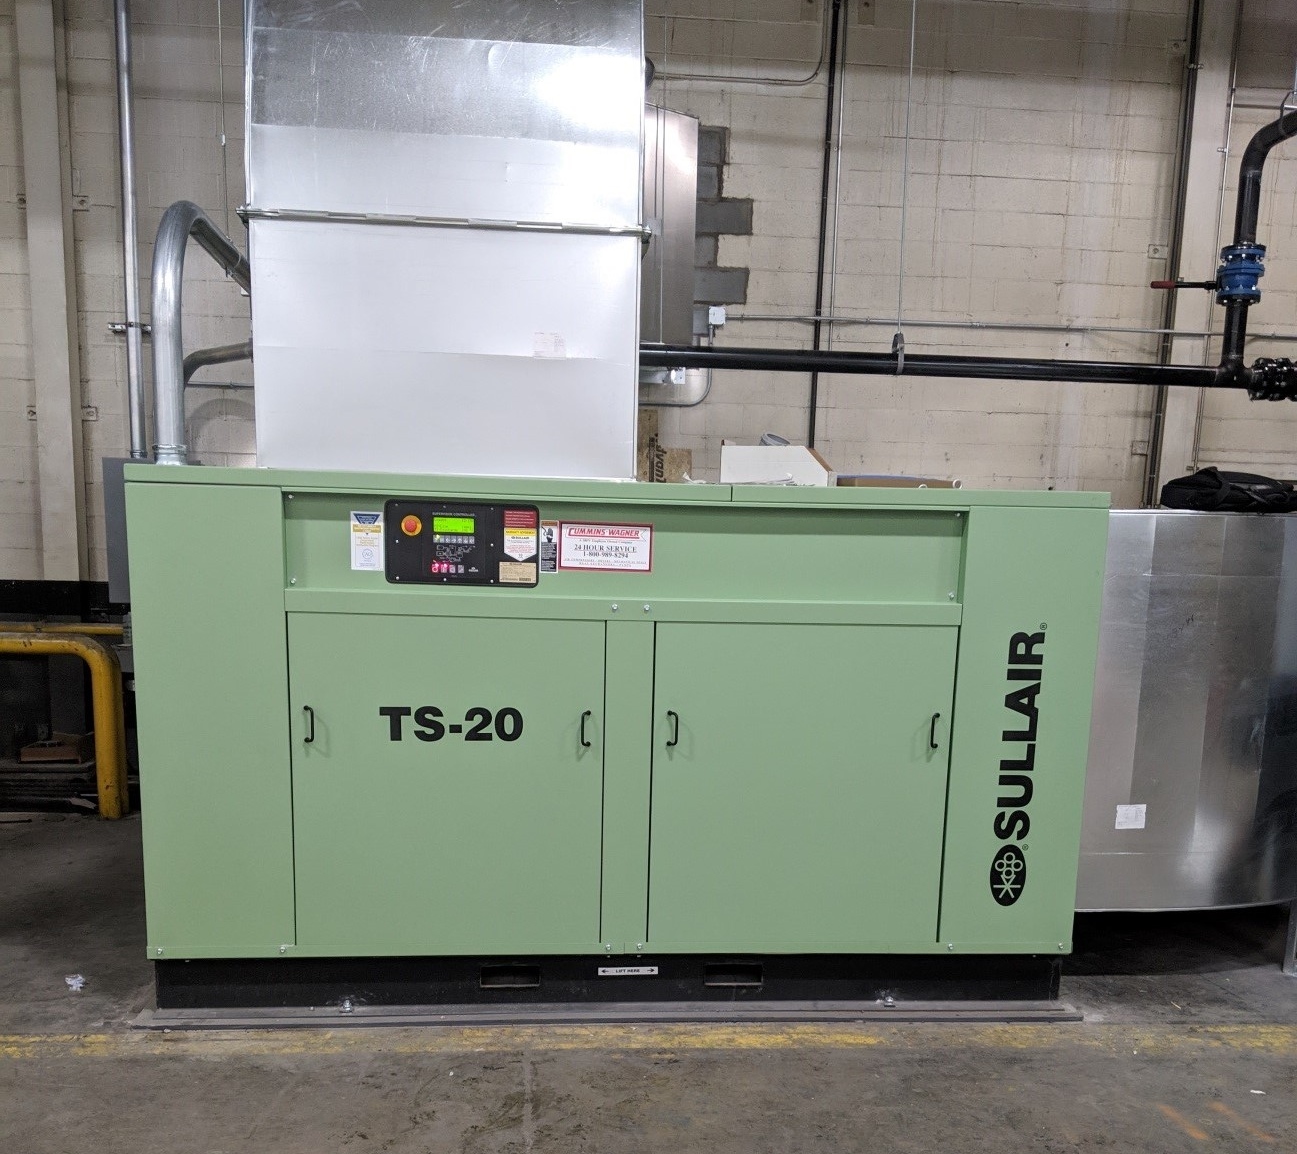 200hp 2-stage tandem air end, variable capacity control air compressor in for local printing company in Pennsylvania.